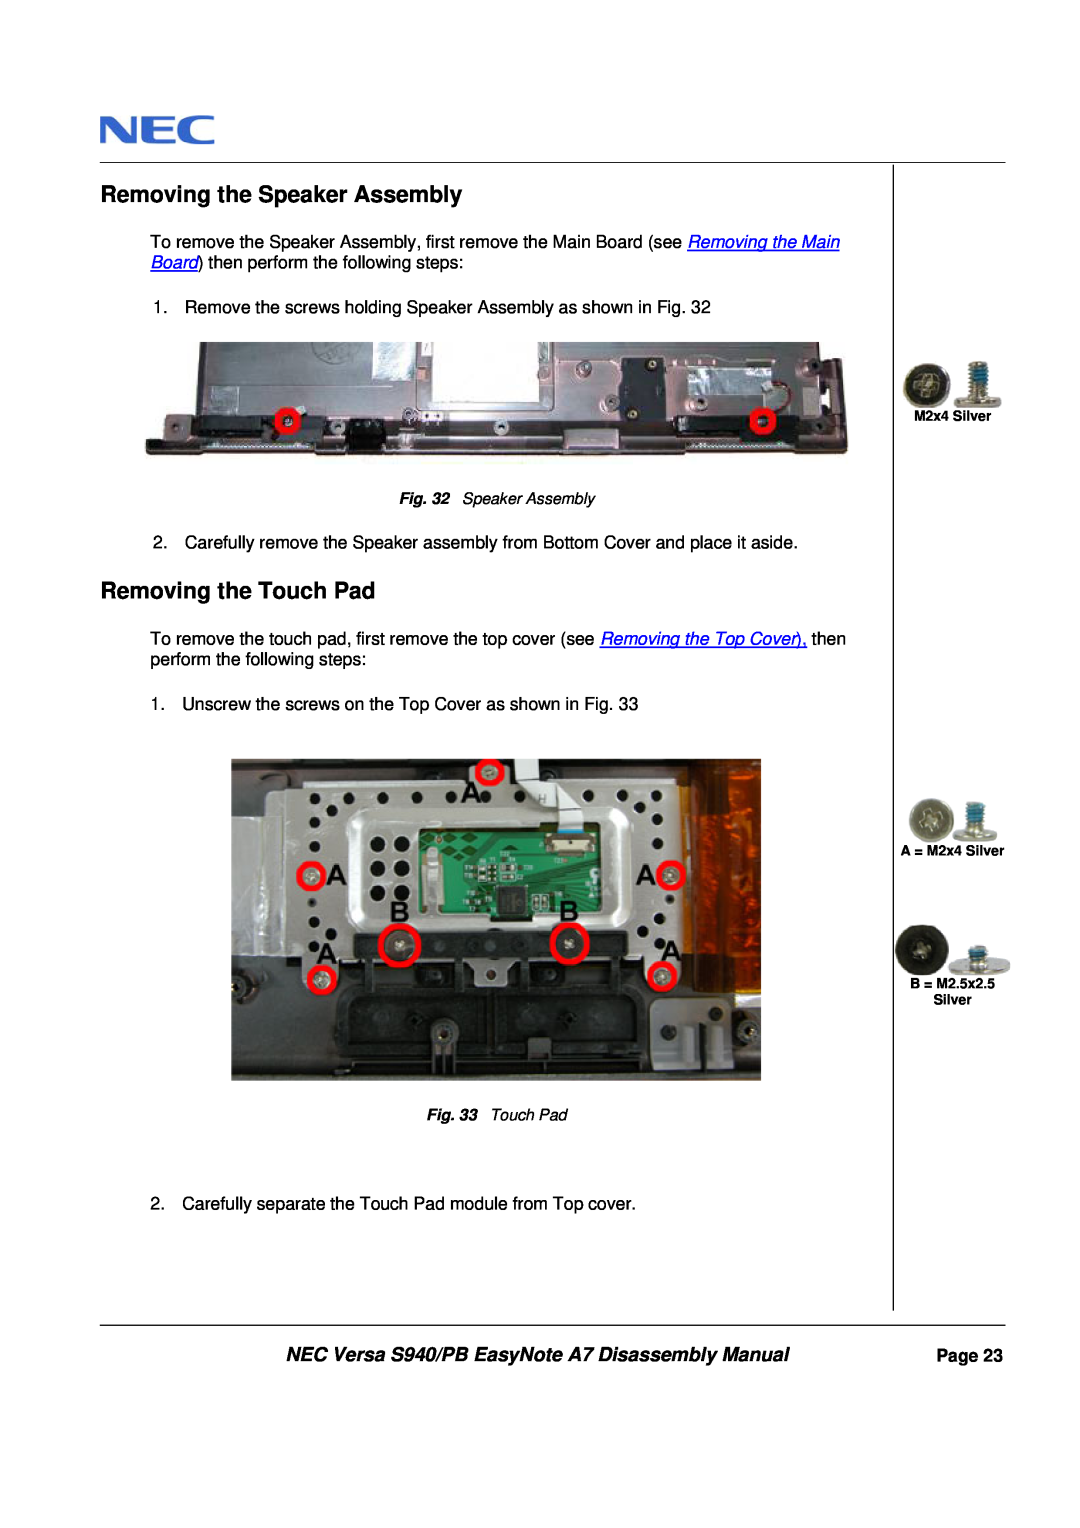 Packard Bell Removing the Speaker Assembly, Removing the Touch Pad, NEC Versa S940/PB EasyNote A7 Disassembly Manual 